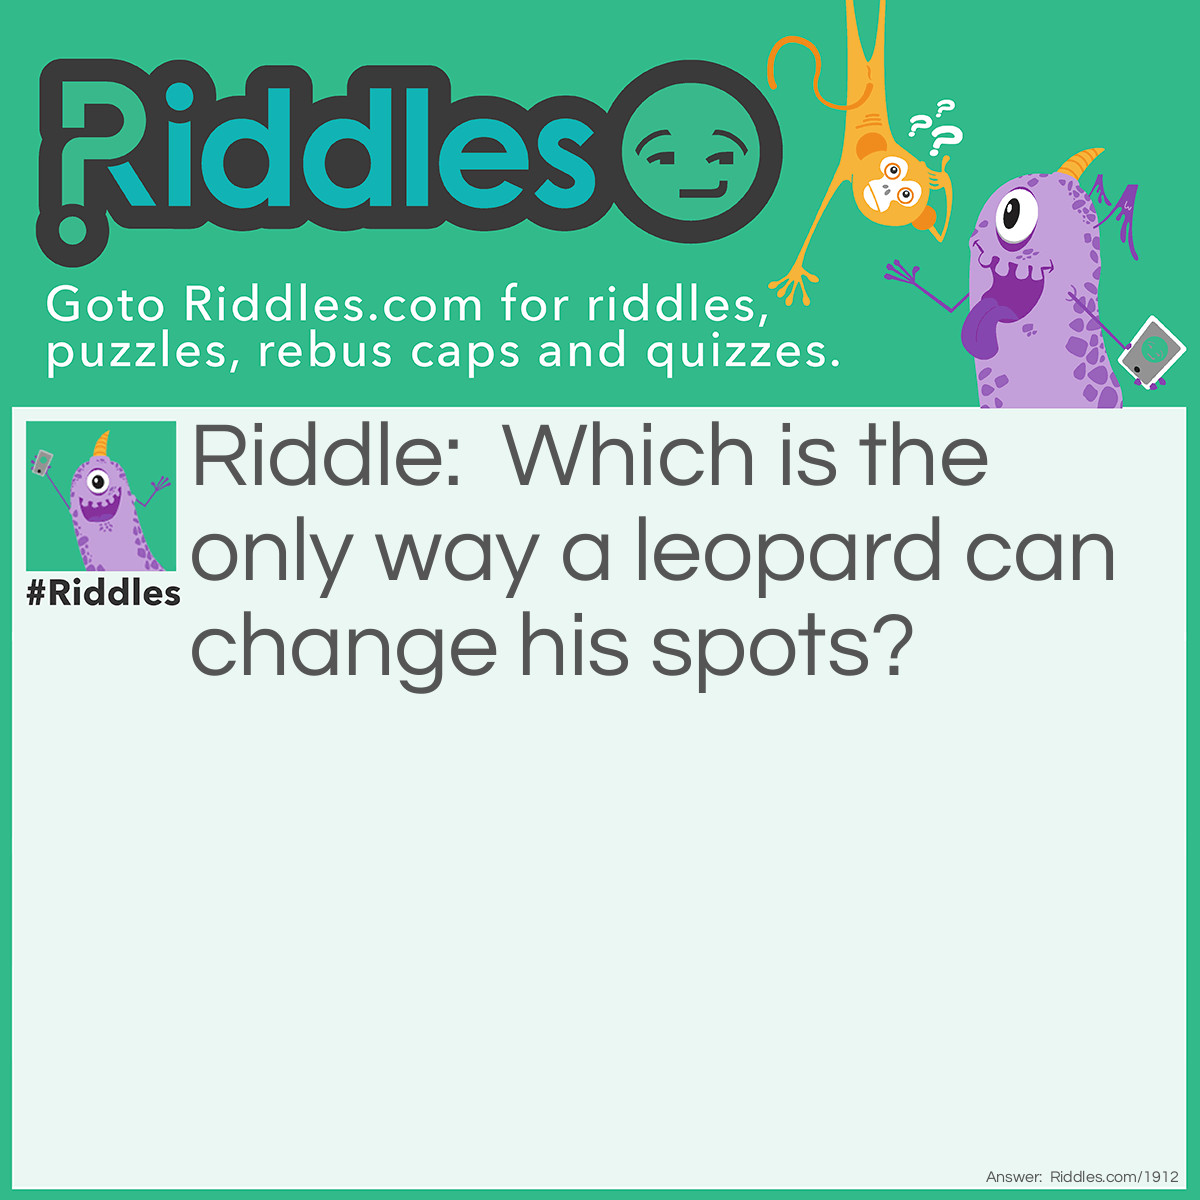 Riddle: Which is the only way a leopard can change his spots? Answer: By going from one spot to another.